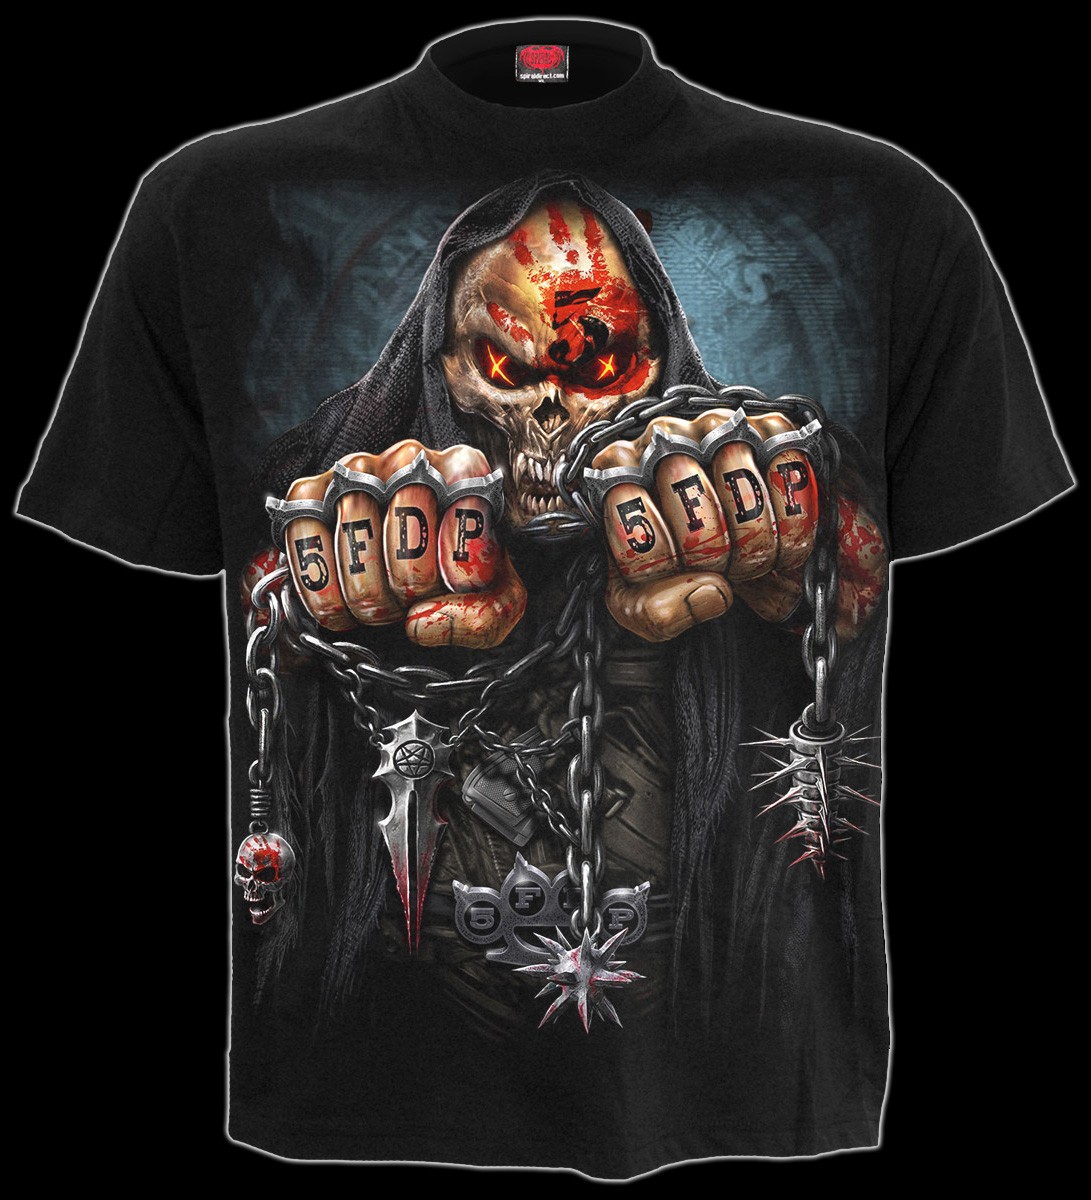 Five Finger Death Punch T-Shirt - 5FDP Game Over